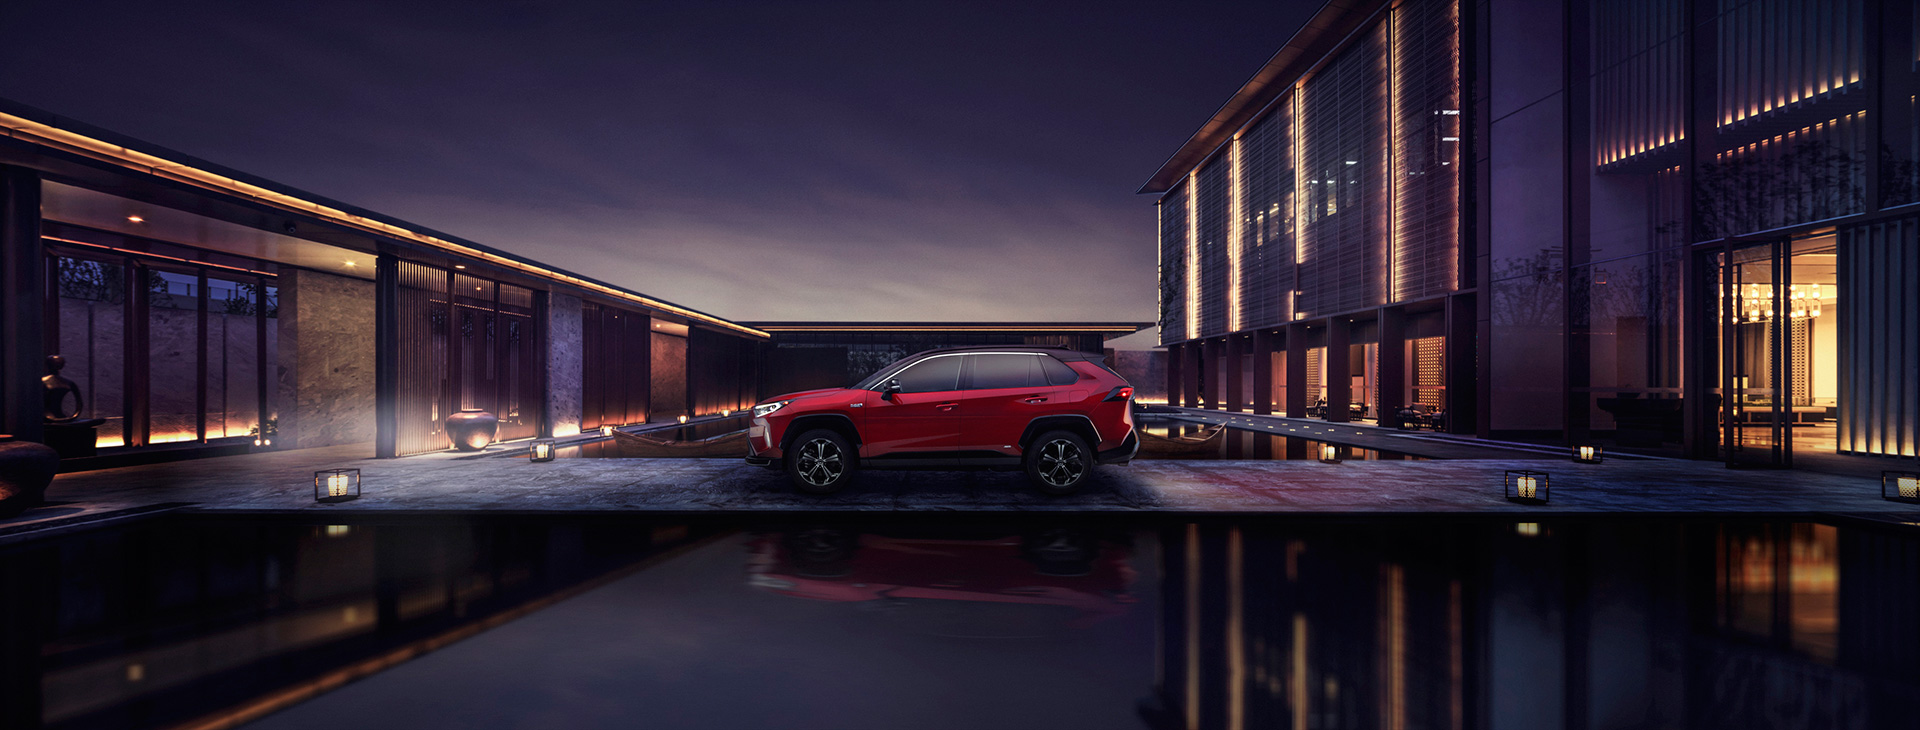 Toyota Revs Up Lineup with New 302-Horsepower RAV4 Prime - Image 8